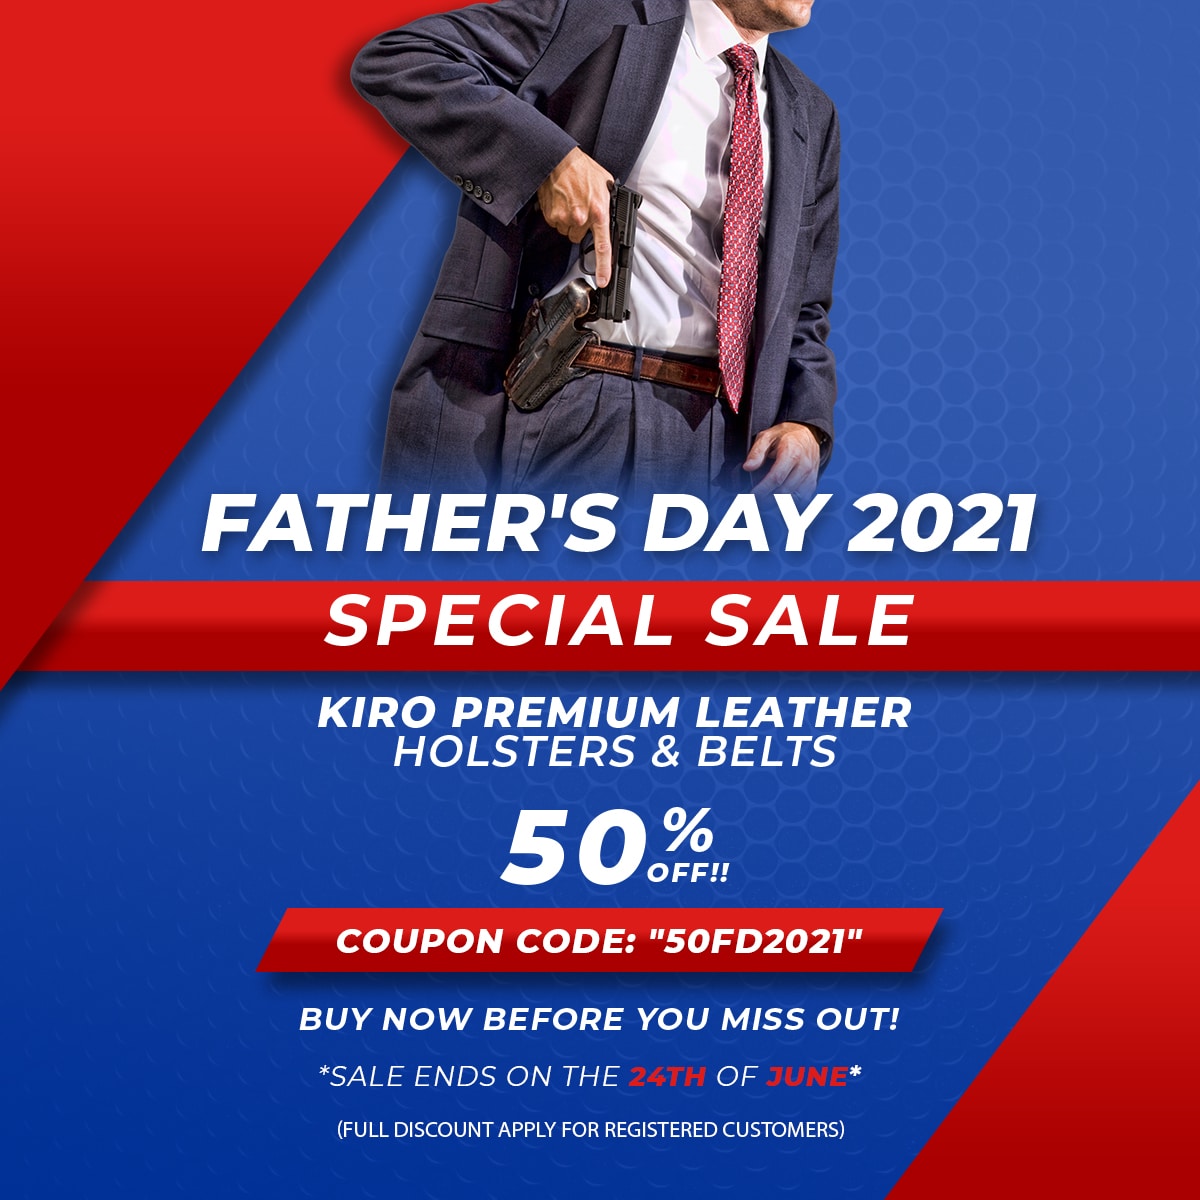 FATHERS DAY KIRO LEATHER HOLSTERS & BELTS SPECIAL SALE